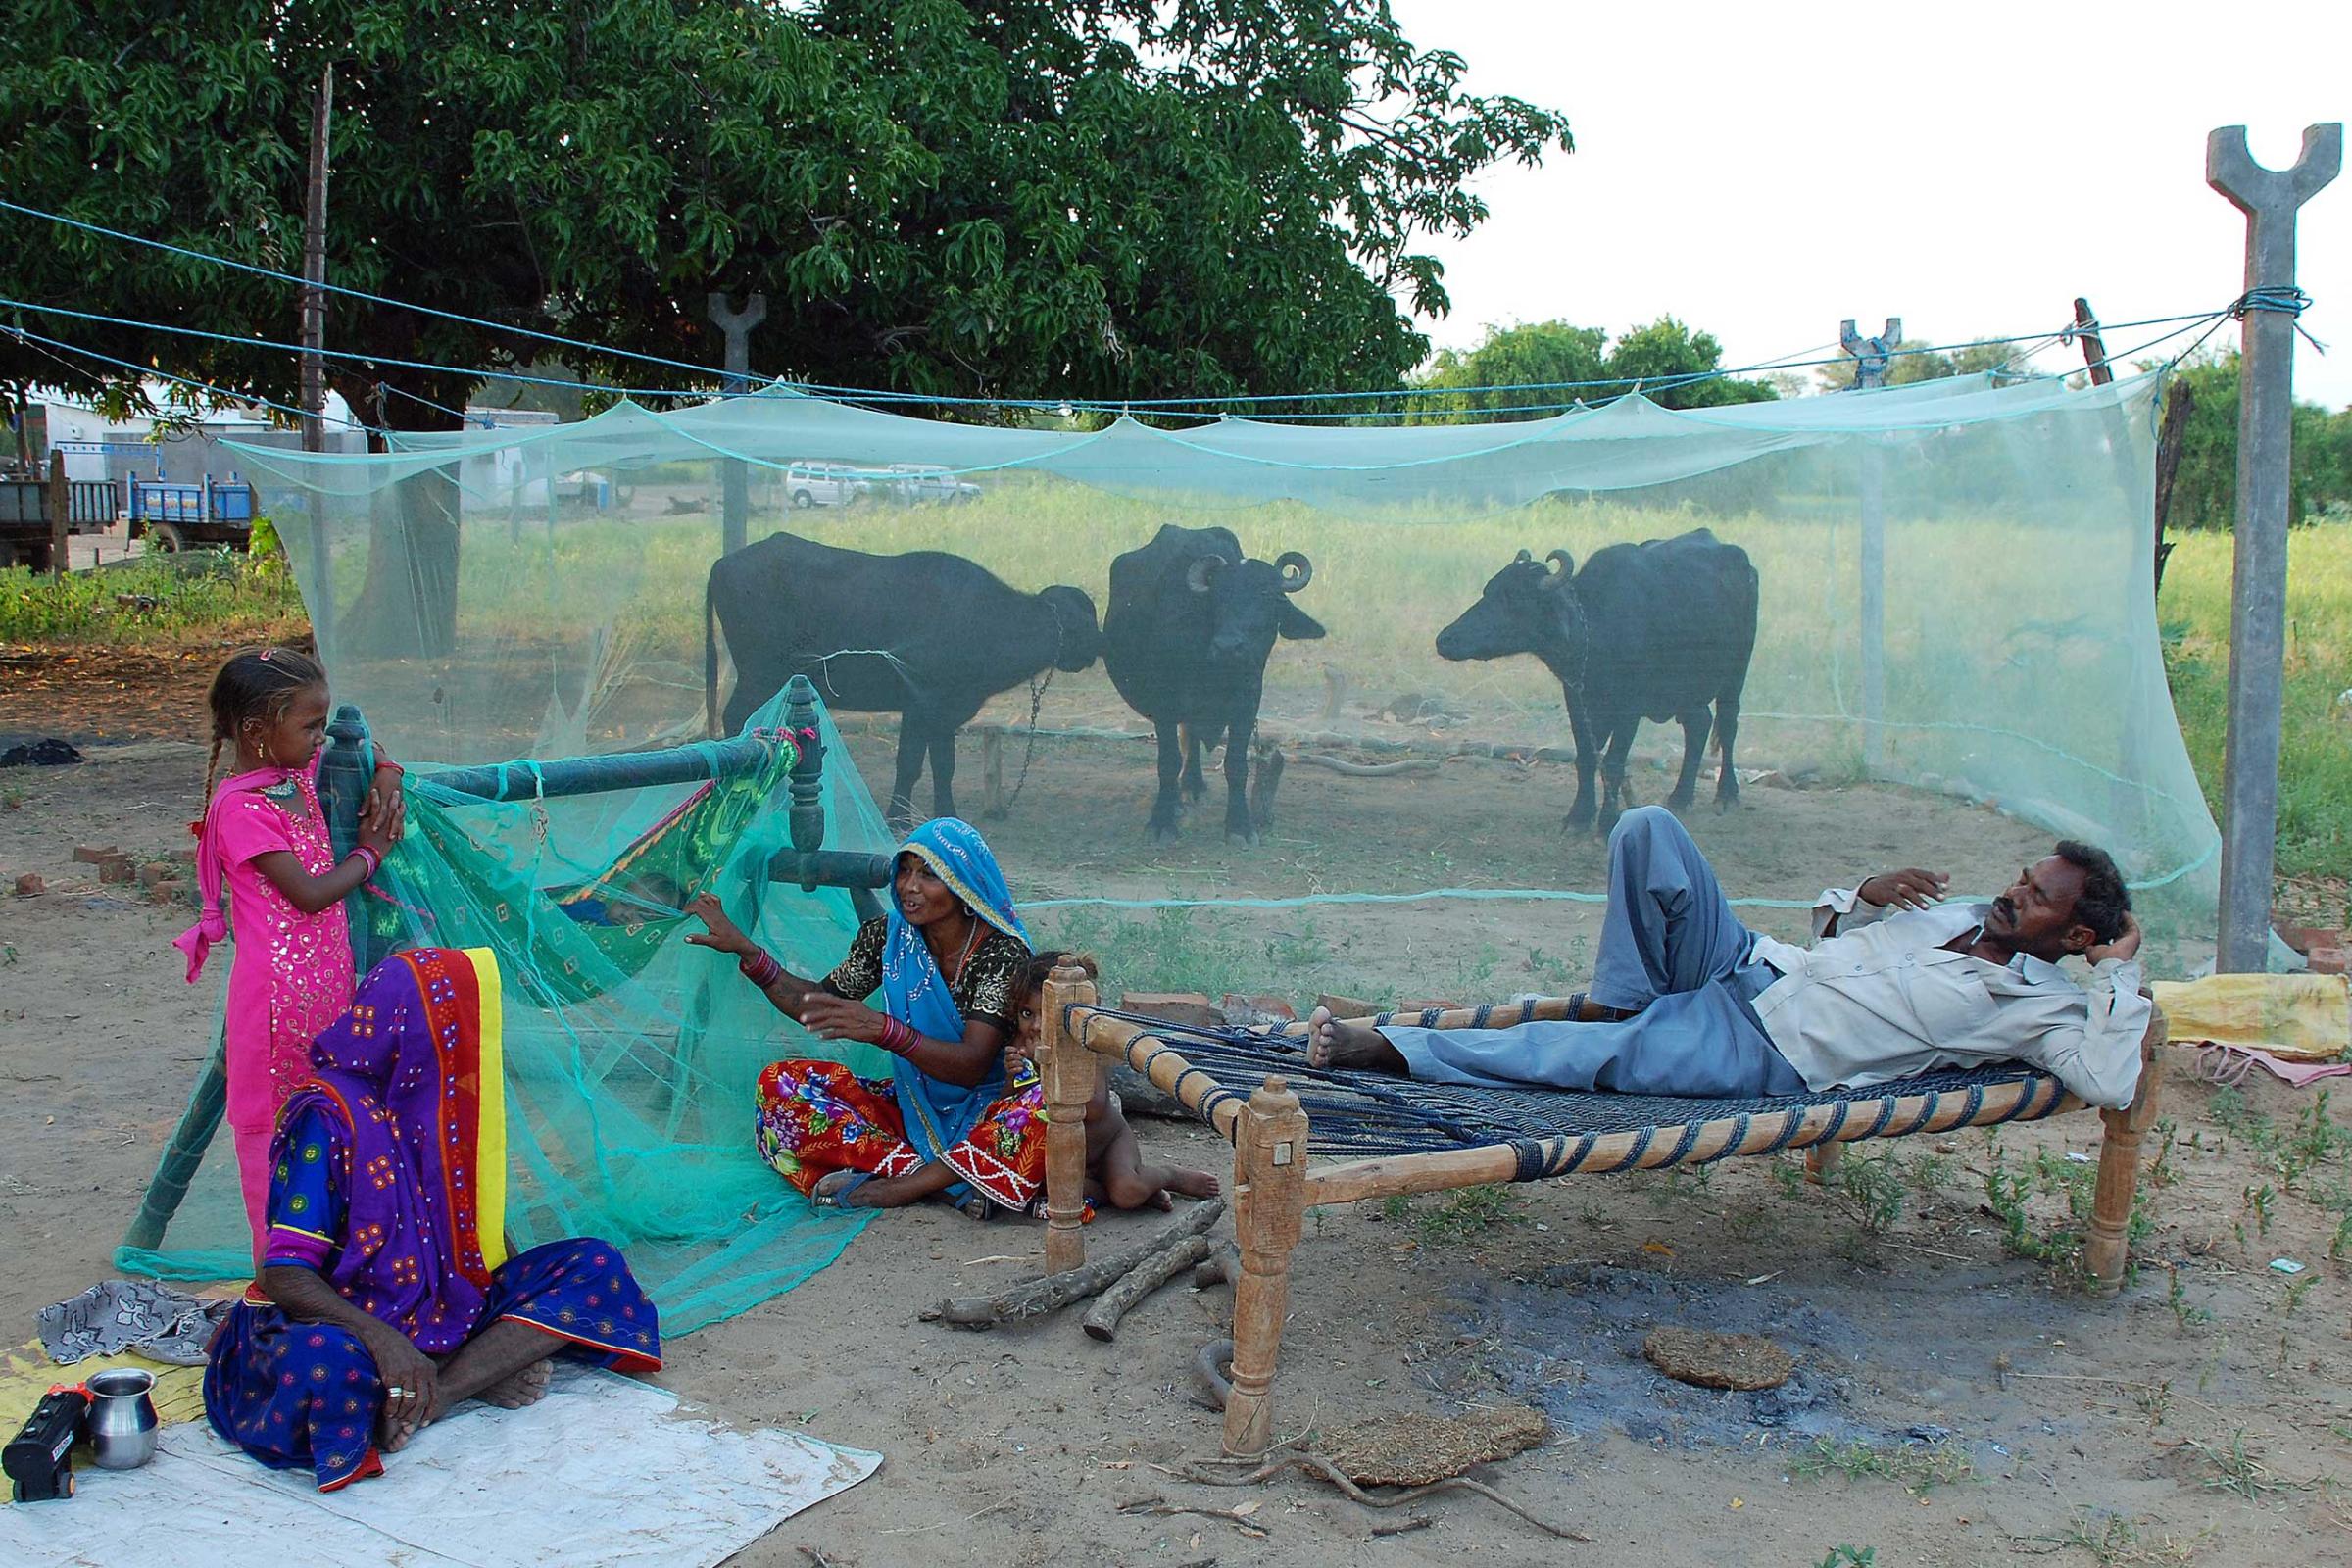 A farmer protects his family and animals from mosquitos in Gujarat, India.